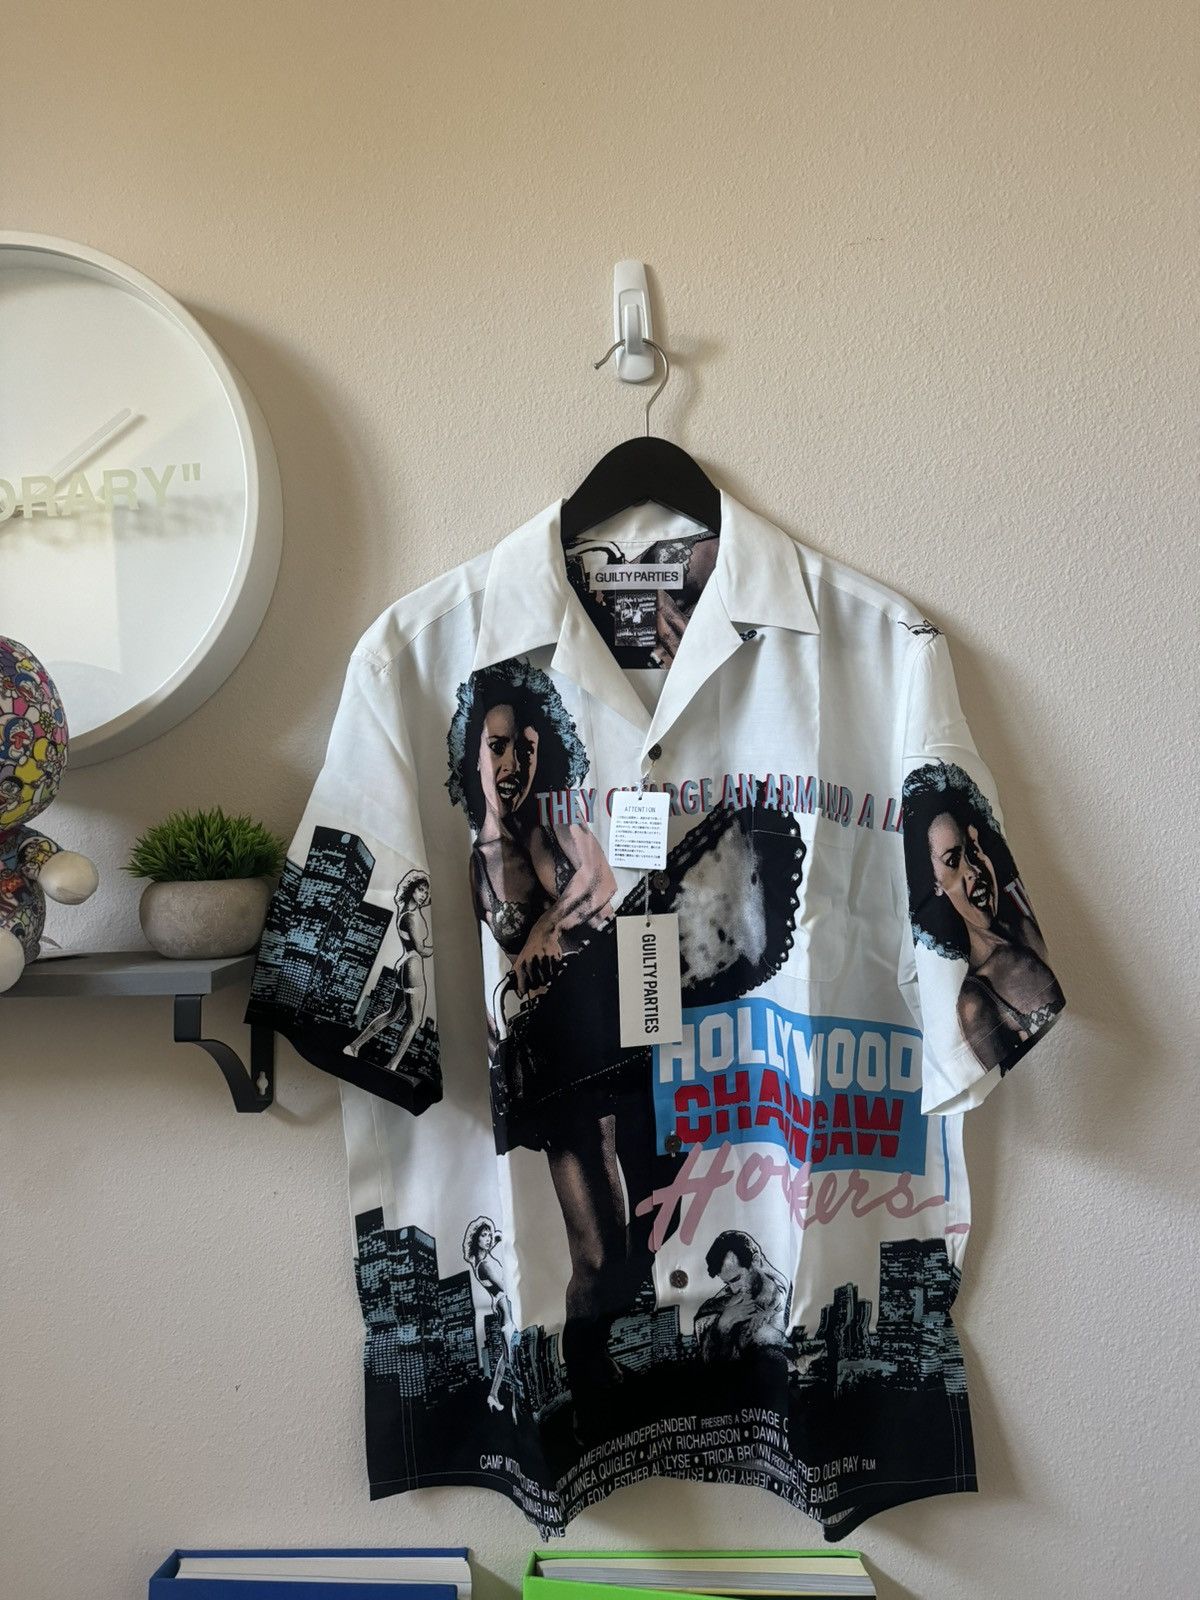 Vintage Wacko Maria Hollywood Chainsaw Hookers Button Up | Grailed